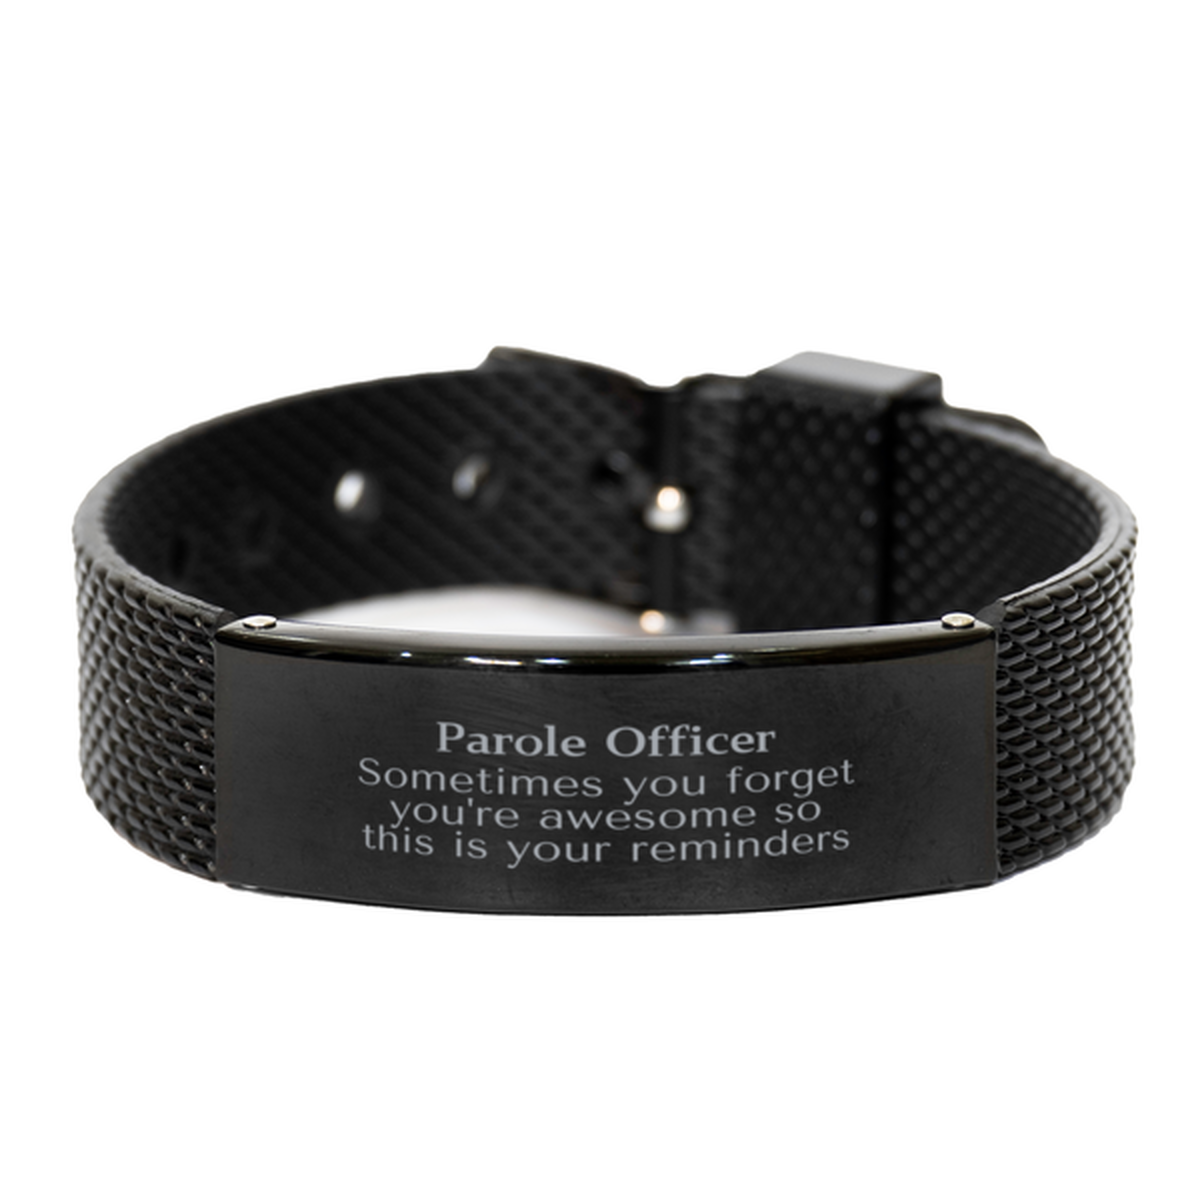 Sentimental Parole Officer Black Shark Mesh Bracelet, Parole Officer Sometimes you forget you're awesome so this is your reminders, Graduation Christmas Birthday Gifts for Parole Officer, Men, Women, Coworkers